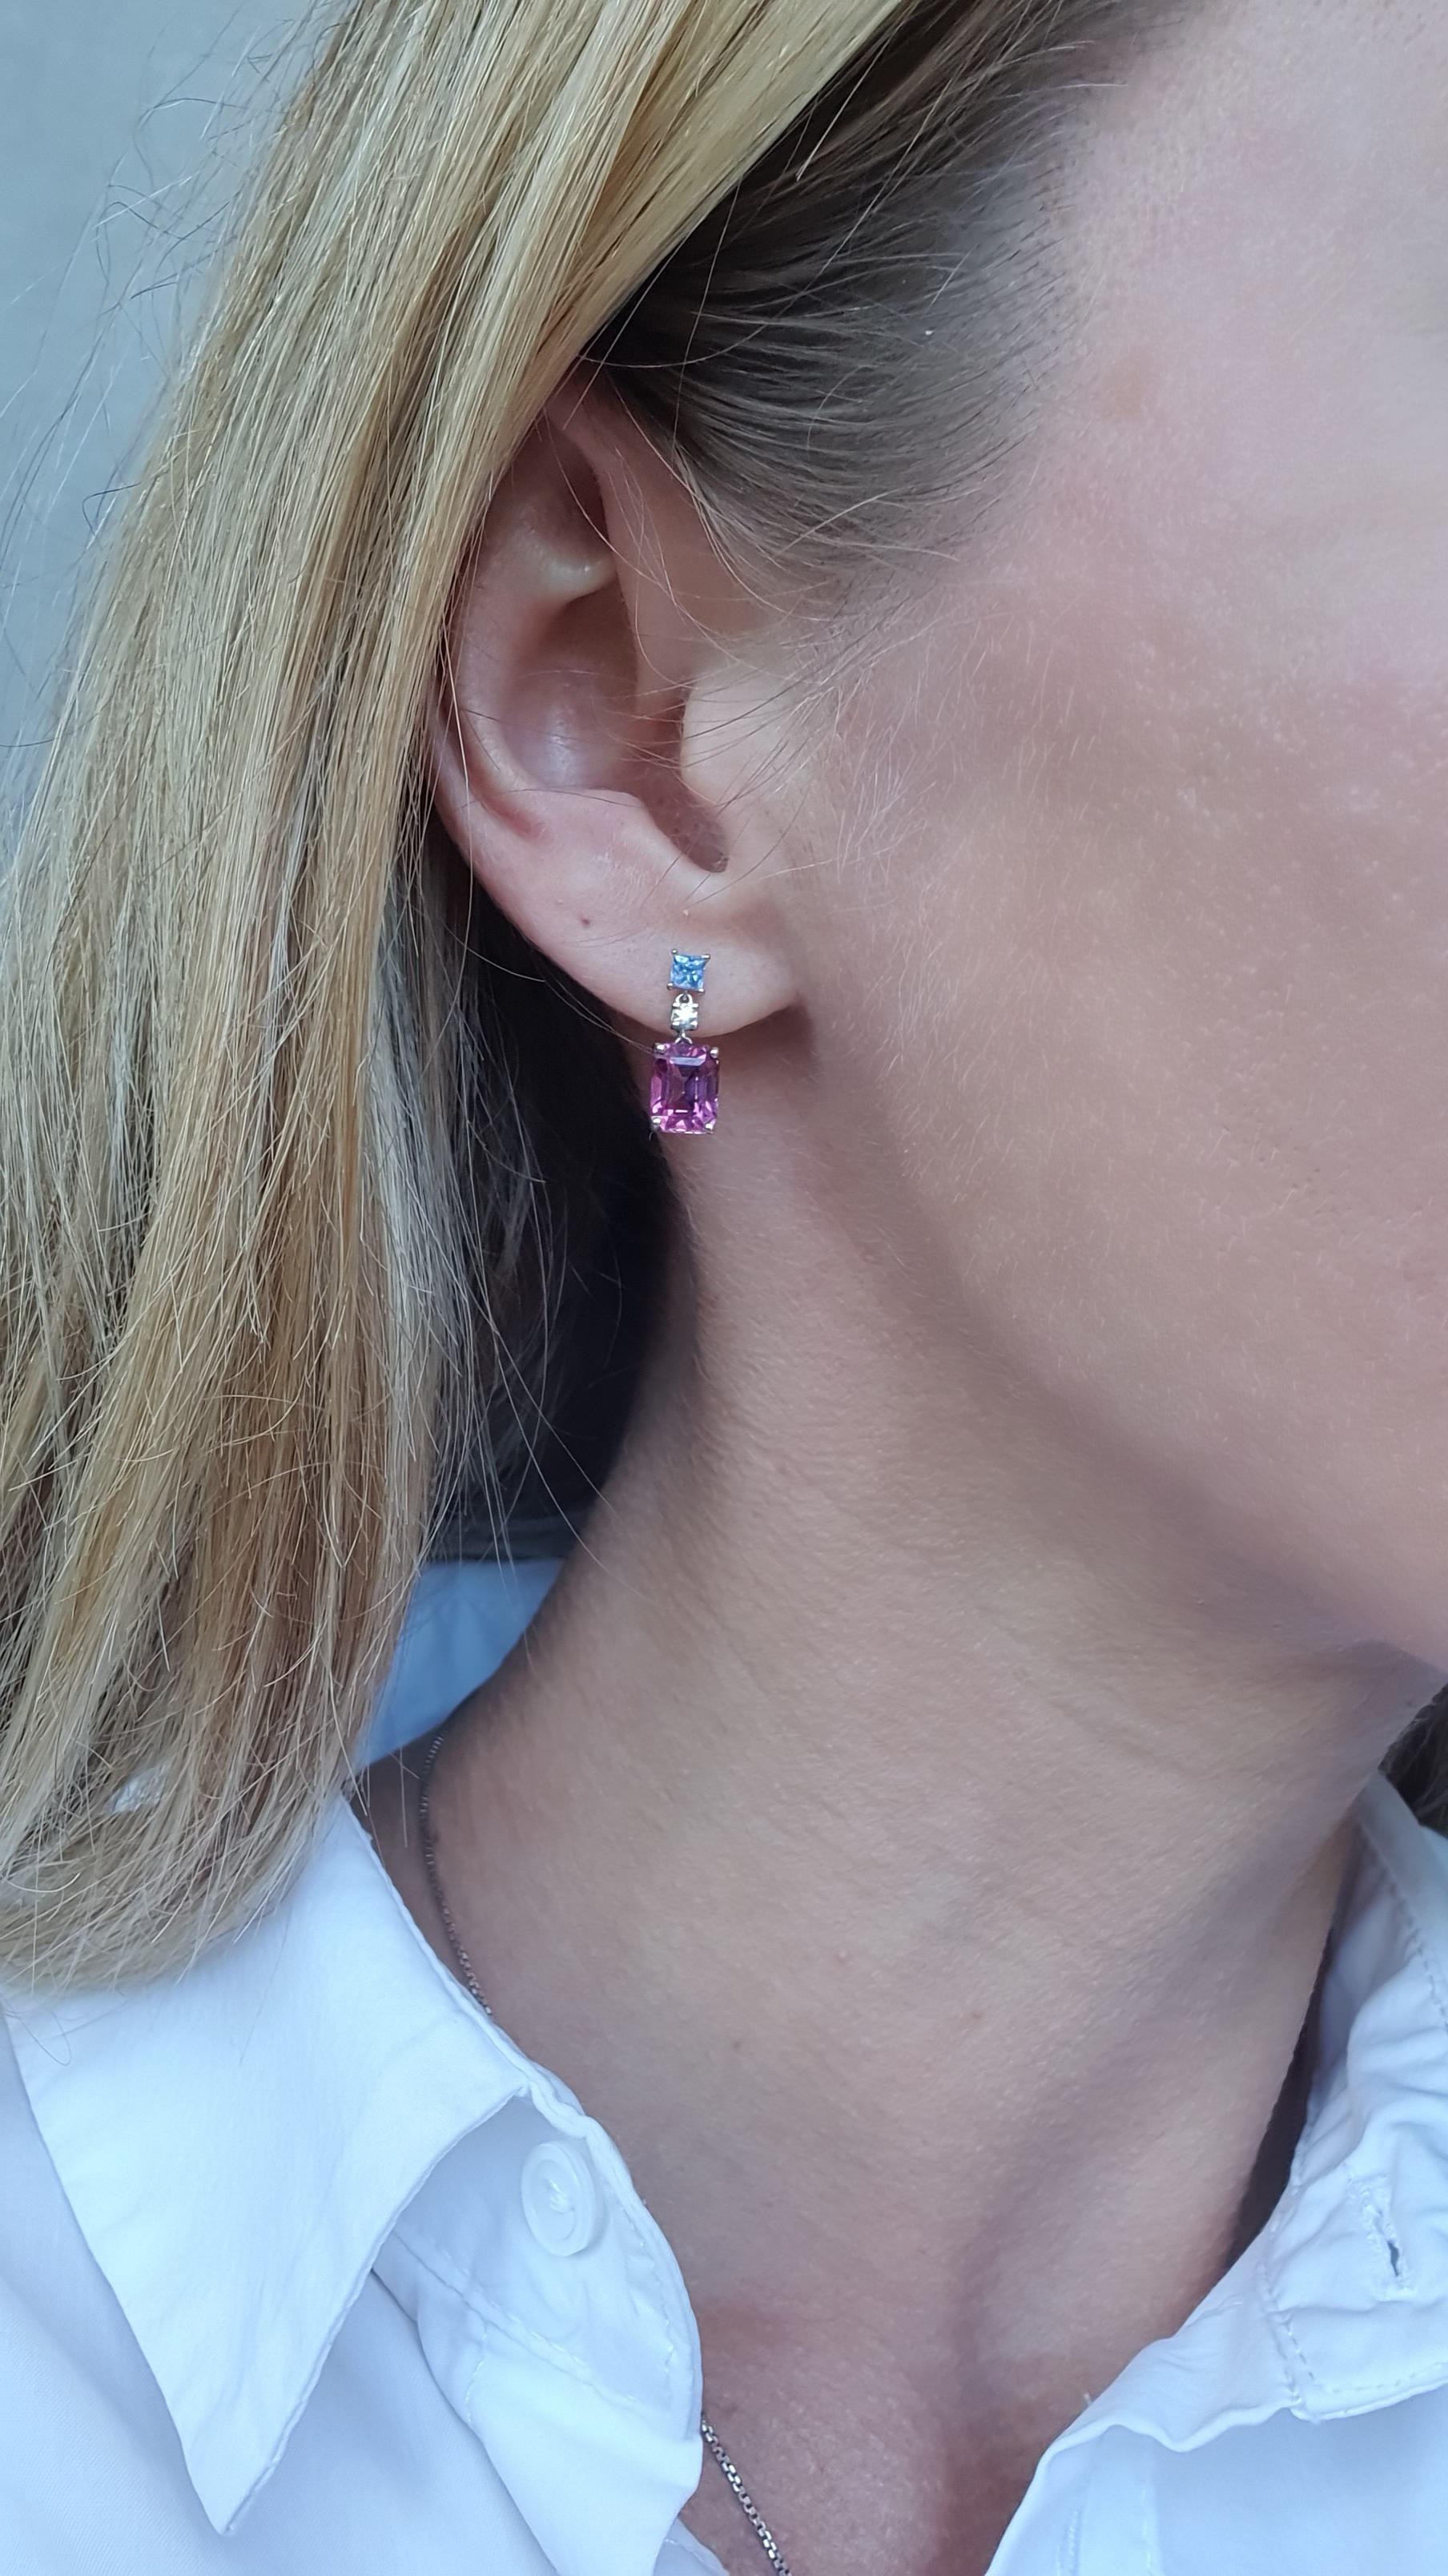  For the most elegant jewellery collectors ALPENGEM created these exquisite radiant cut sapphire and diamond earrings with suspended flawless scissor cut purple garnets.

These rich cold hue gems are in 18 K white gold, which make them an ideal